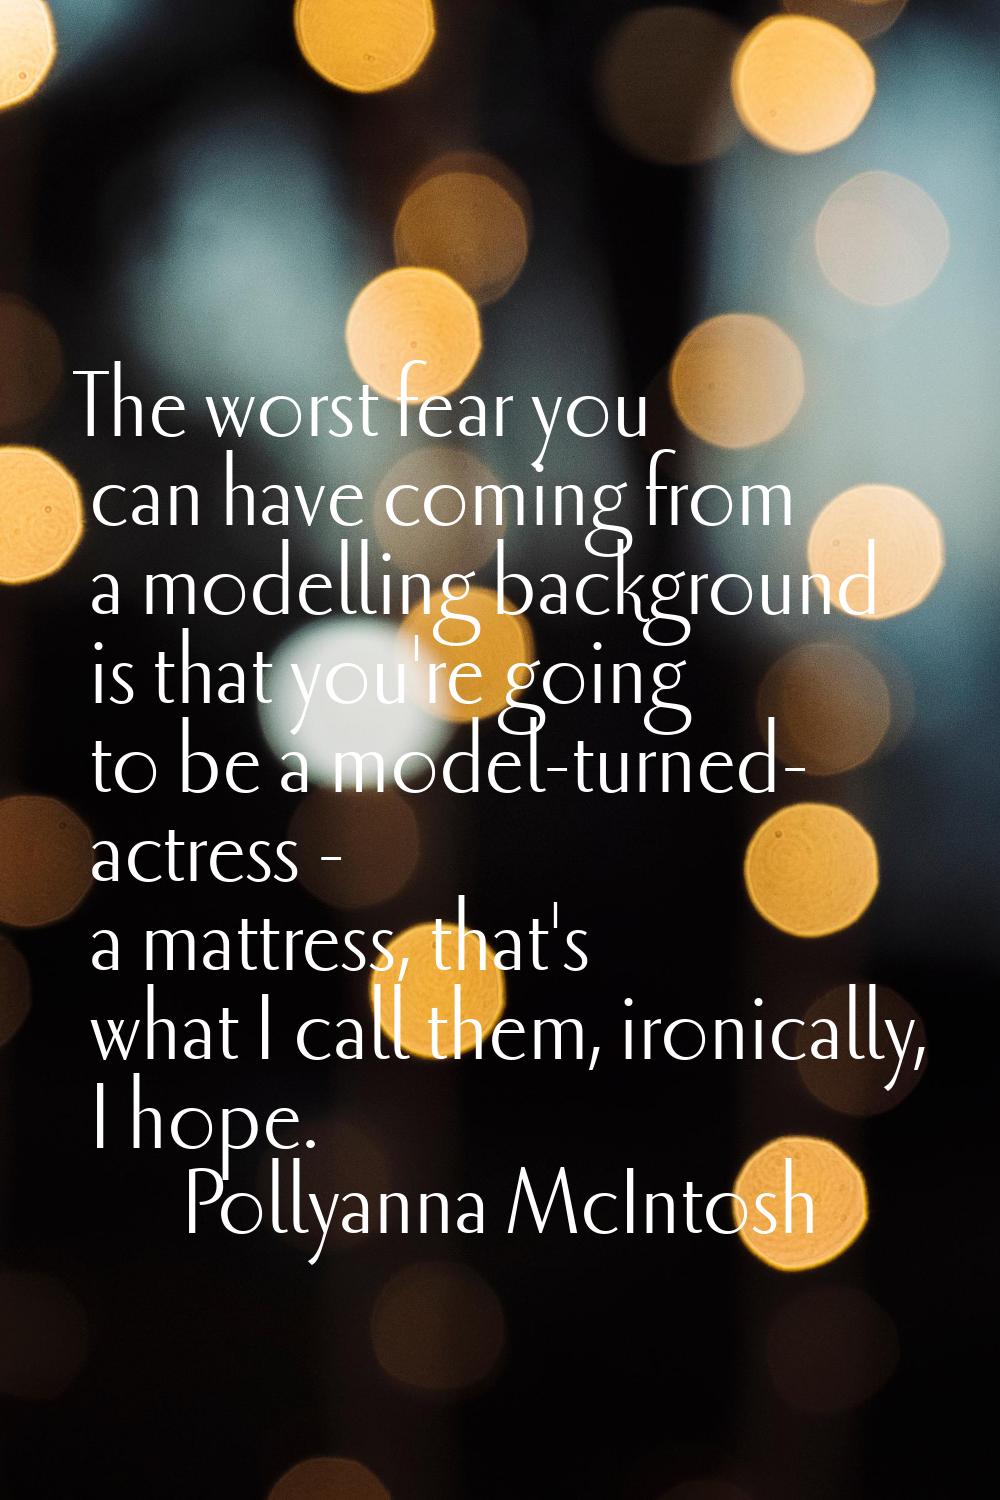 The worst fear you can have coming from a modelling background is that you're going to be a model-t